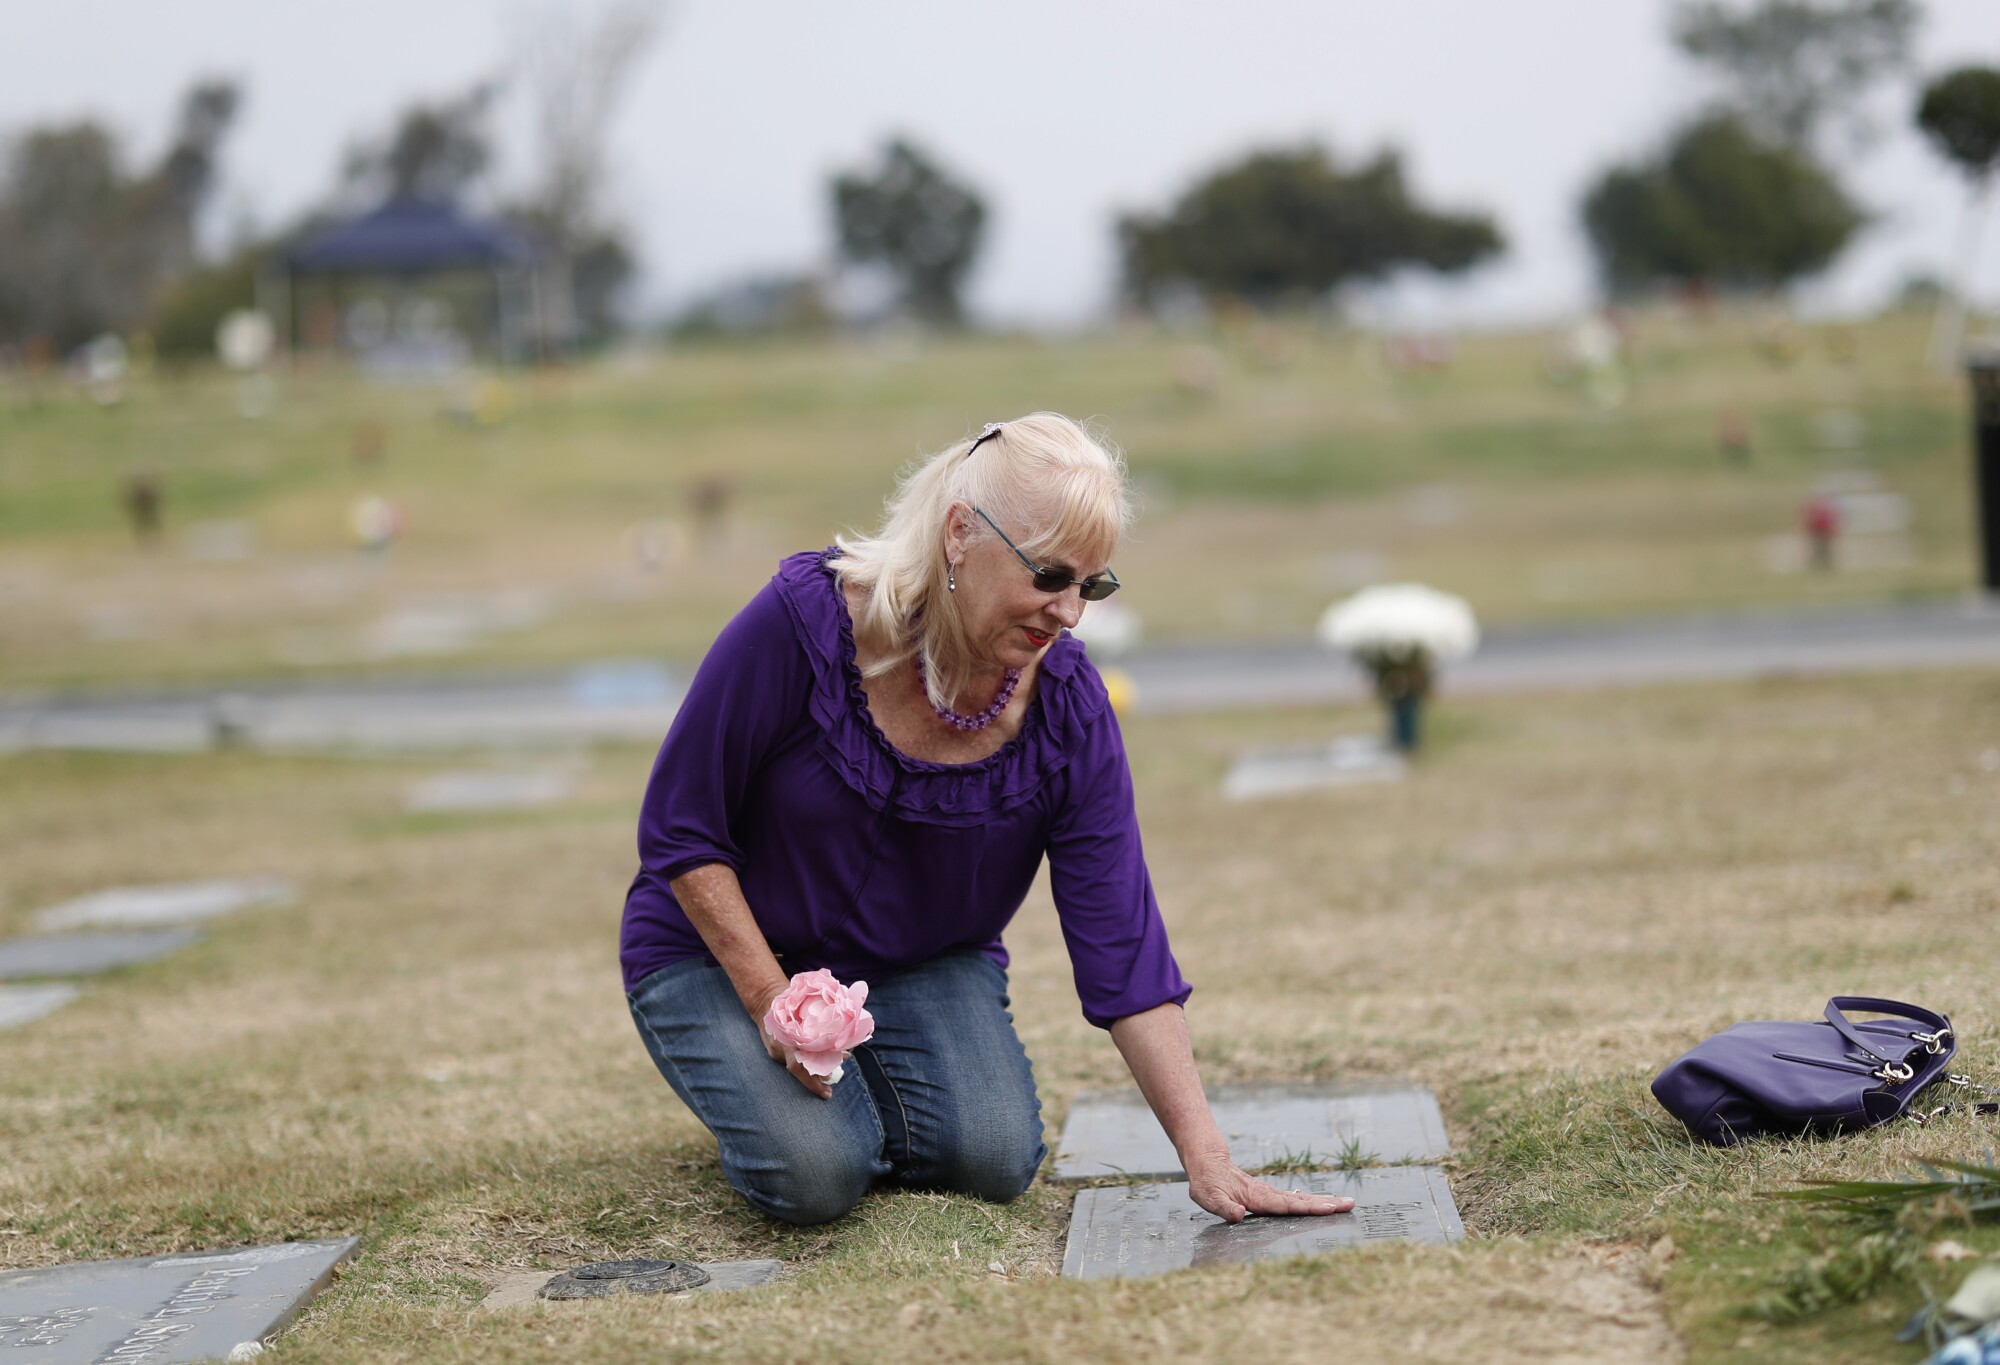 Rebecca Brown visits her husband's grave to place a rose on Nov. 16, 2021.